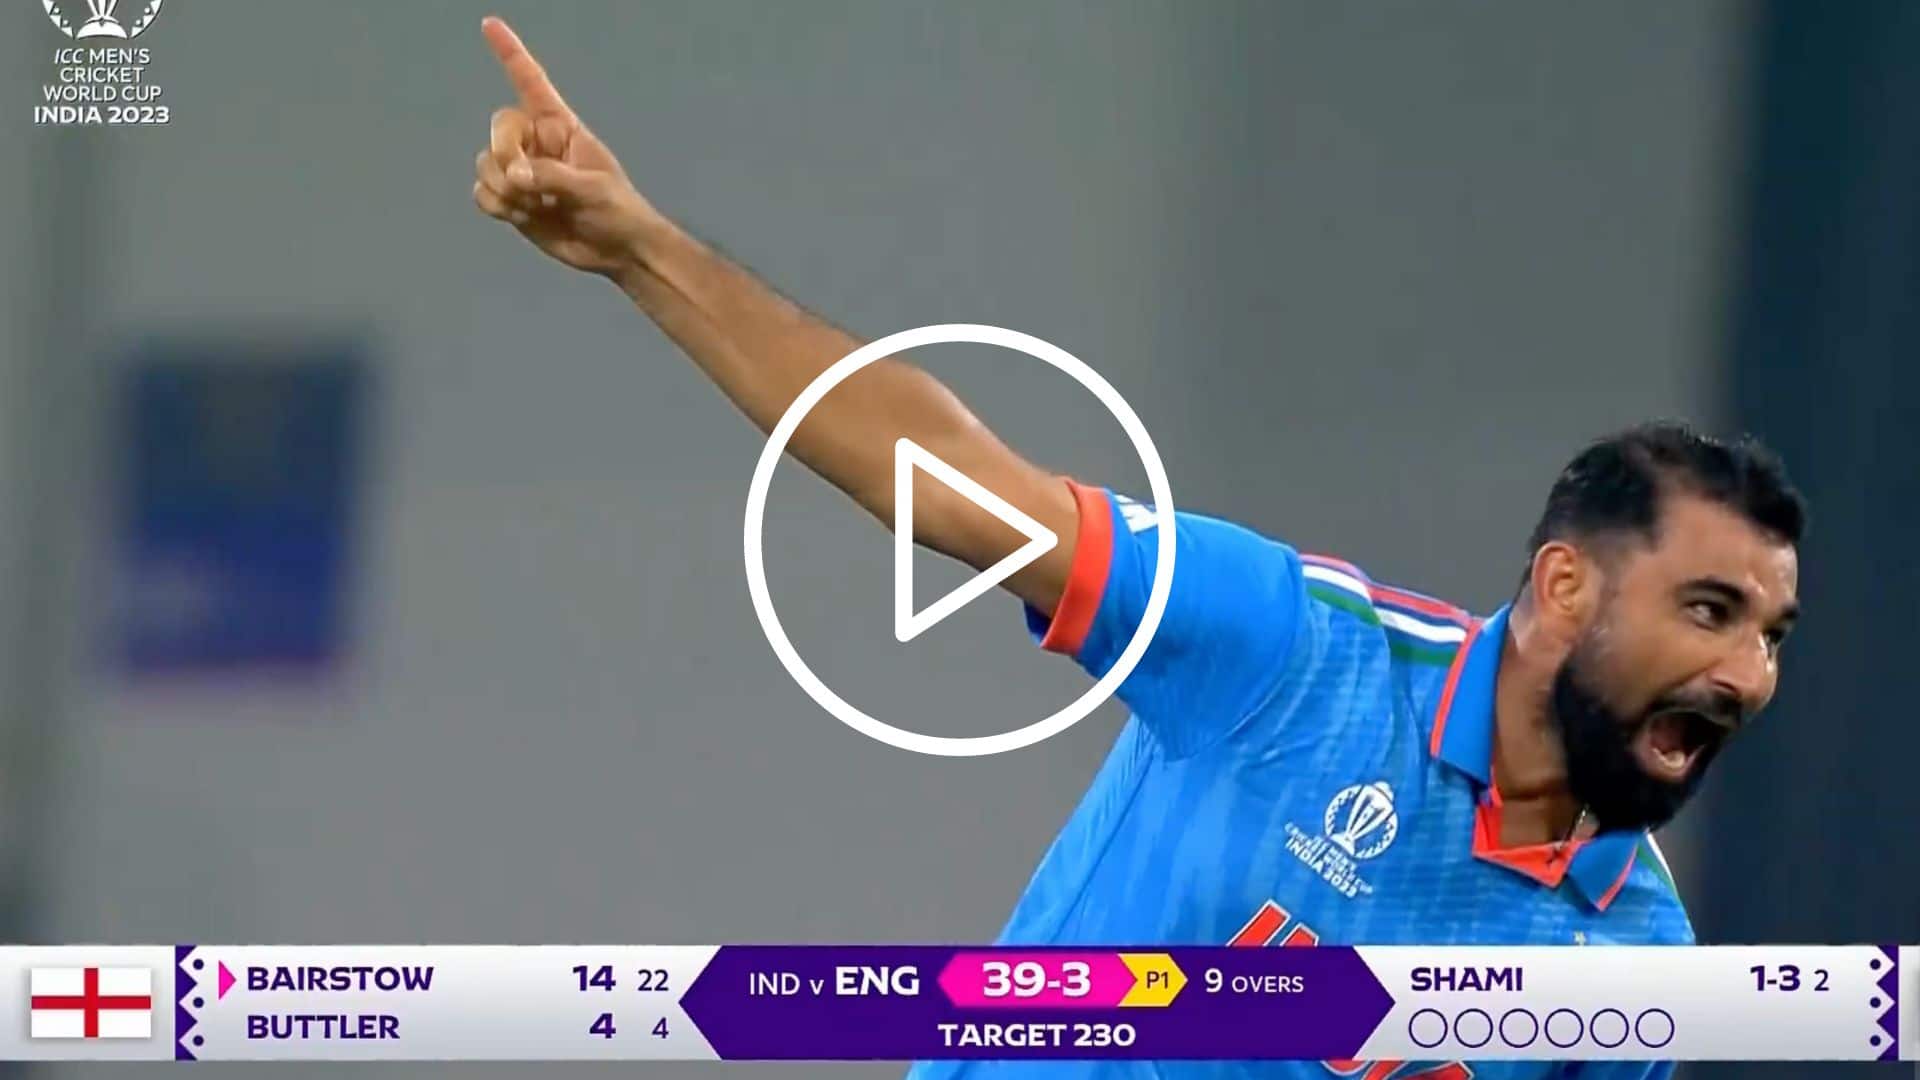 [Watch] Shami's Mouth-Watering In-Seamer Sends Bairstow Back; ENG 4 Down Now